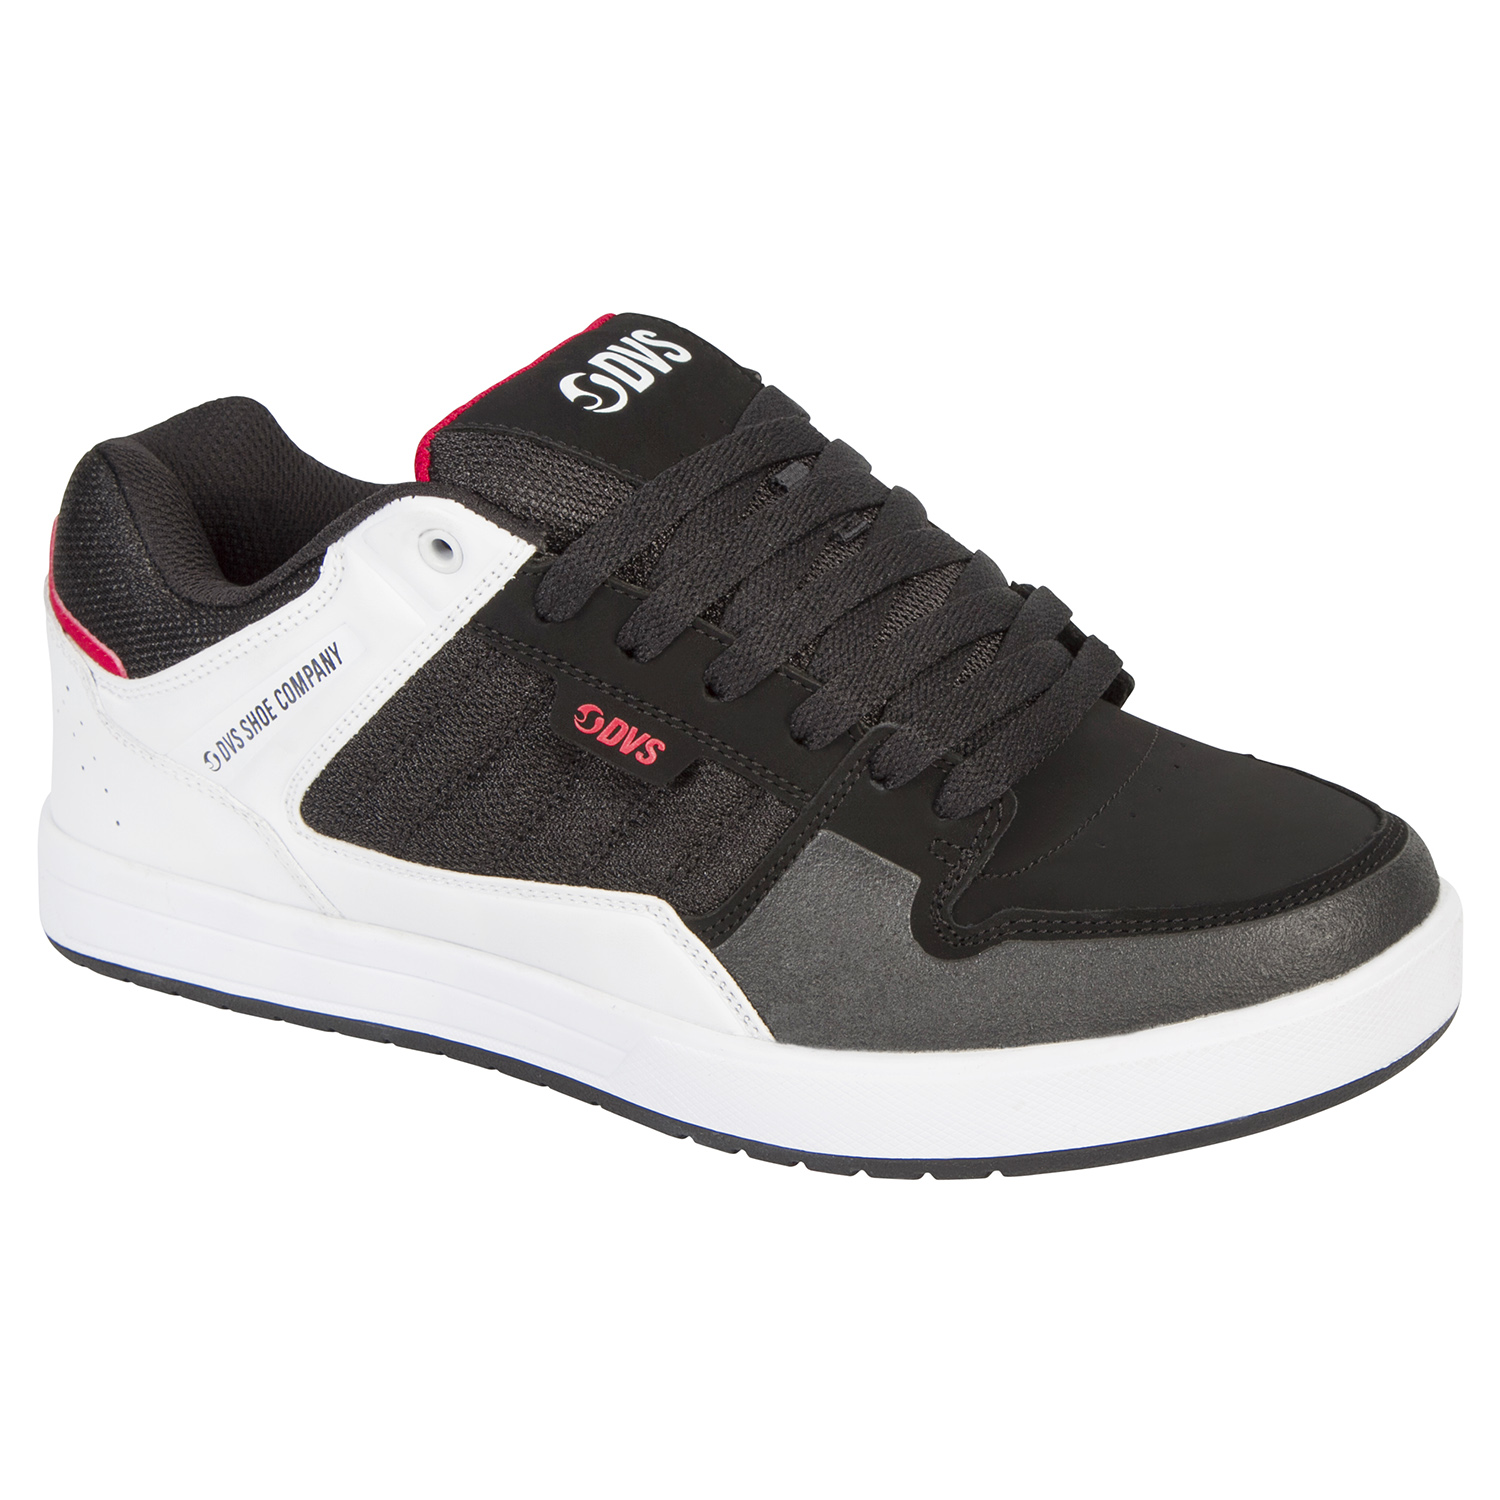 DVS Shoes Portal Black/White/Red/Leather Nubucl